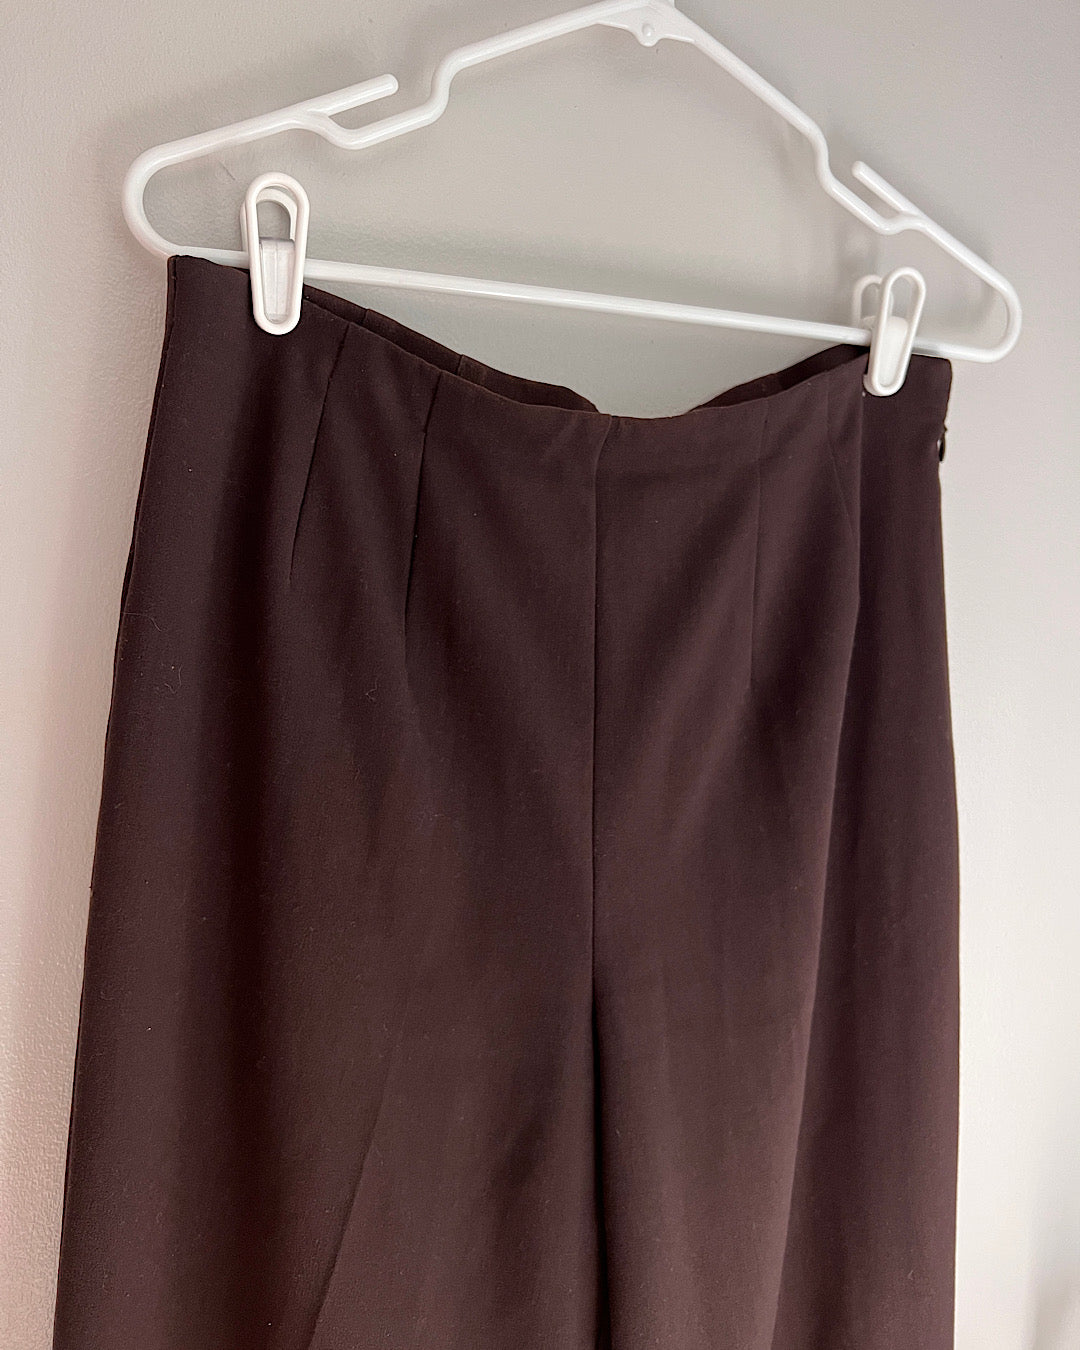 Vintage High Waisted Brown Trouser Pant